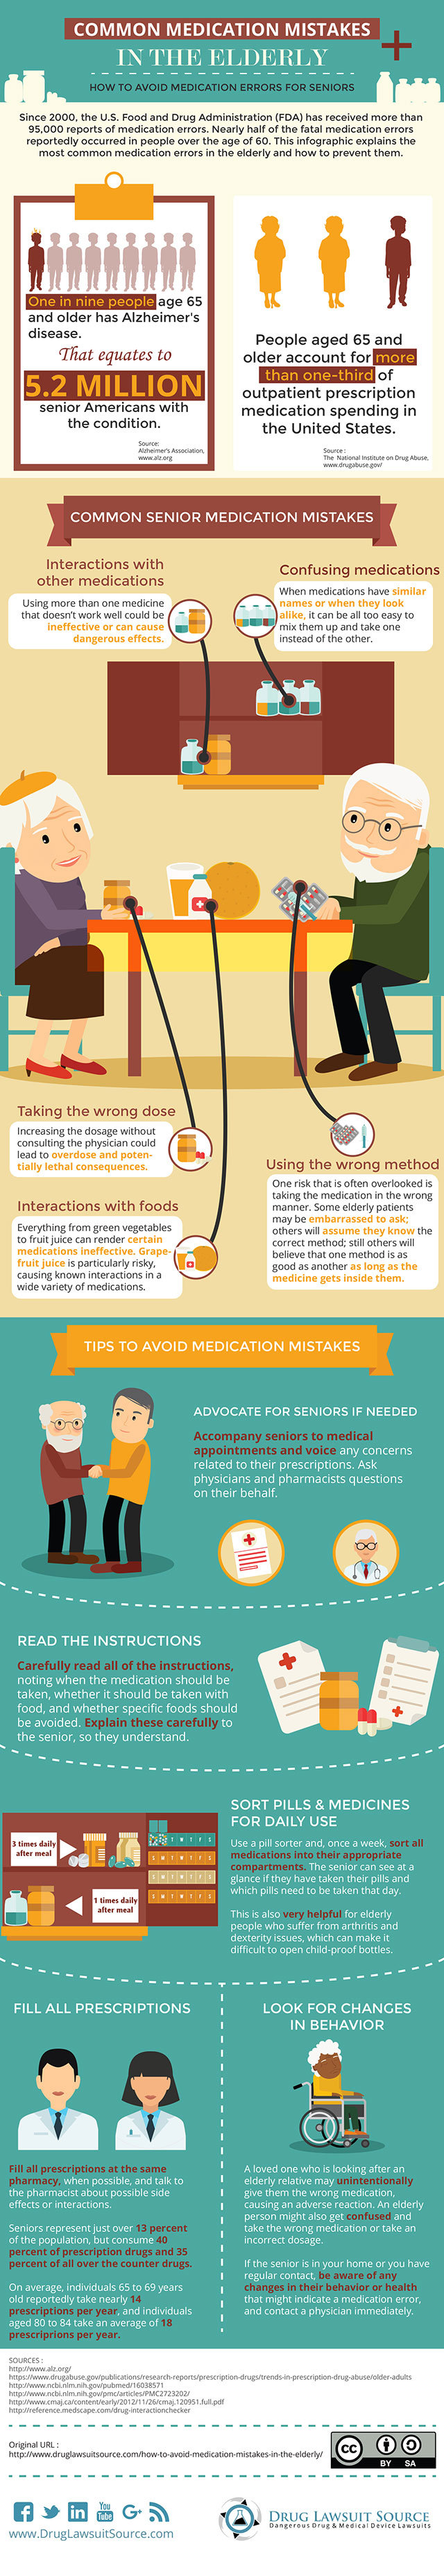 Medication Mistakes